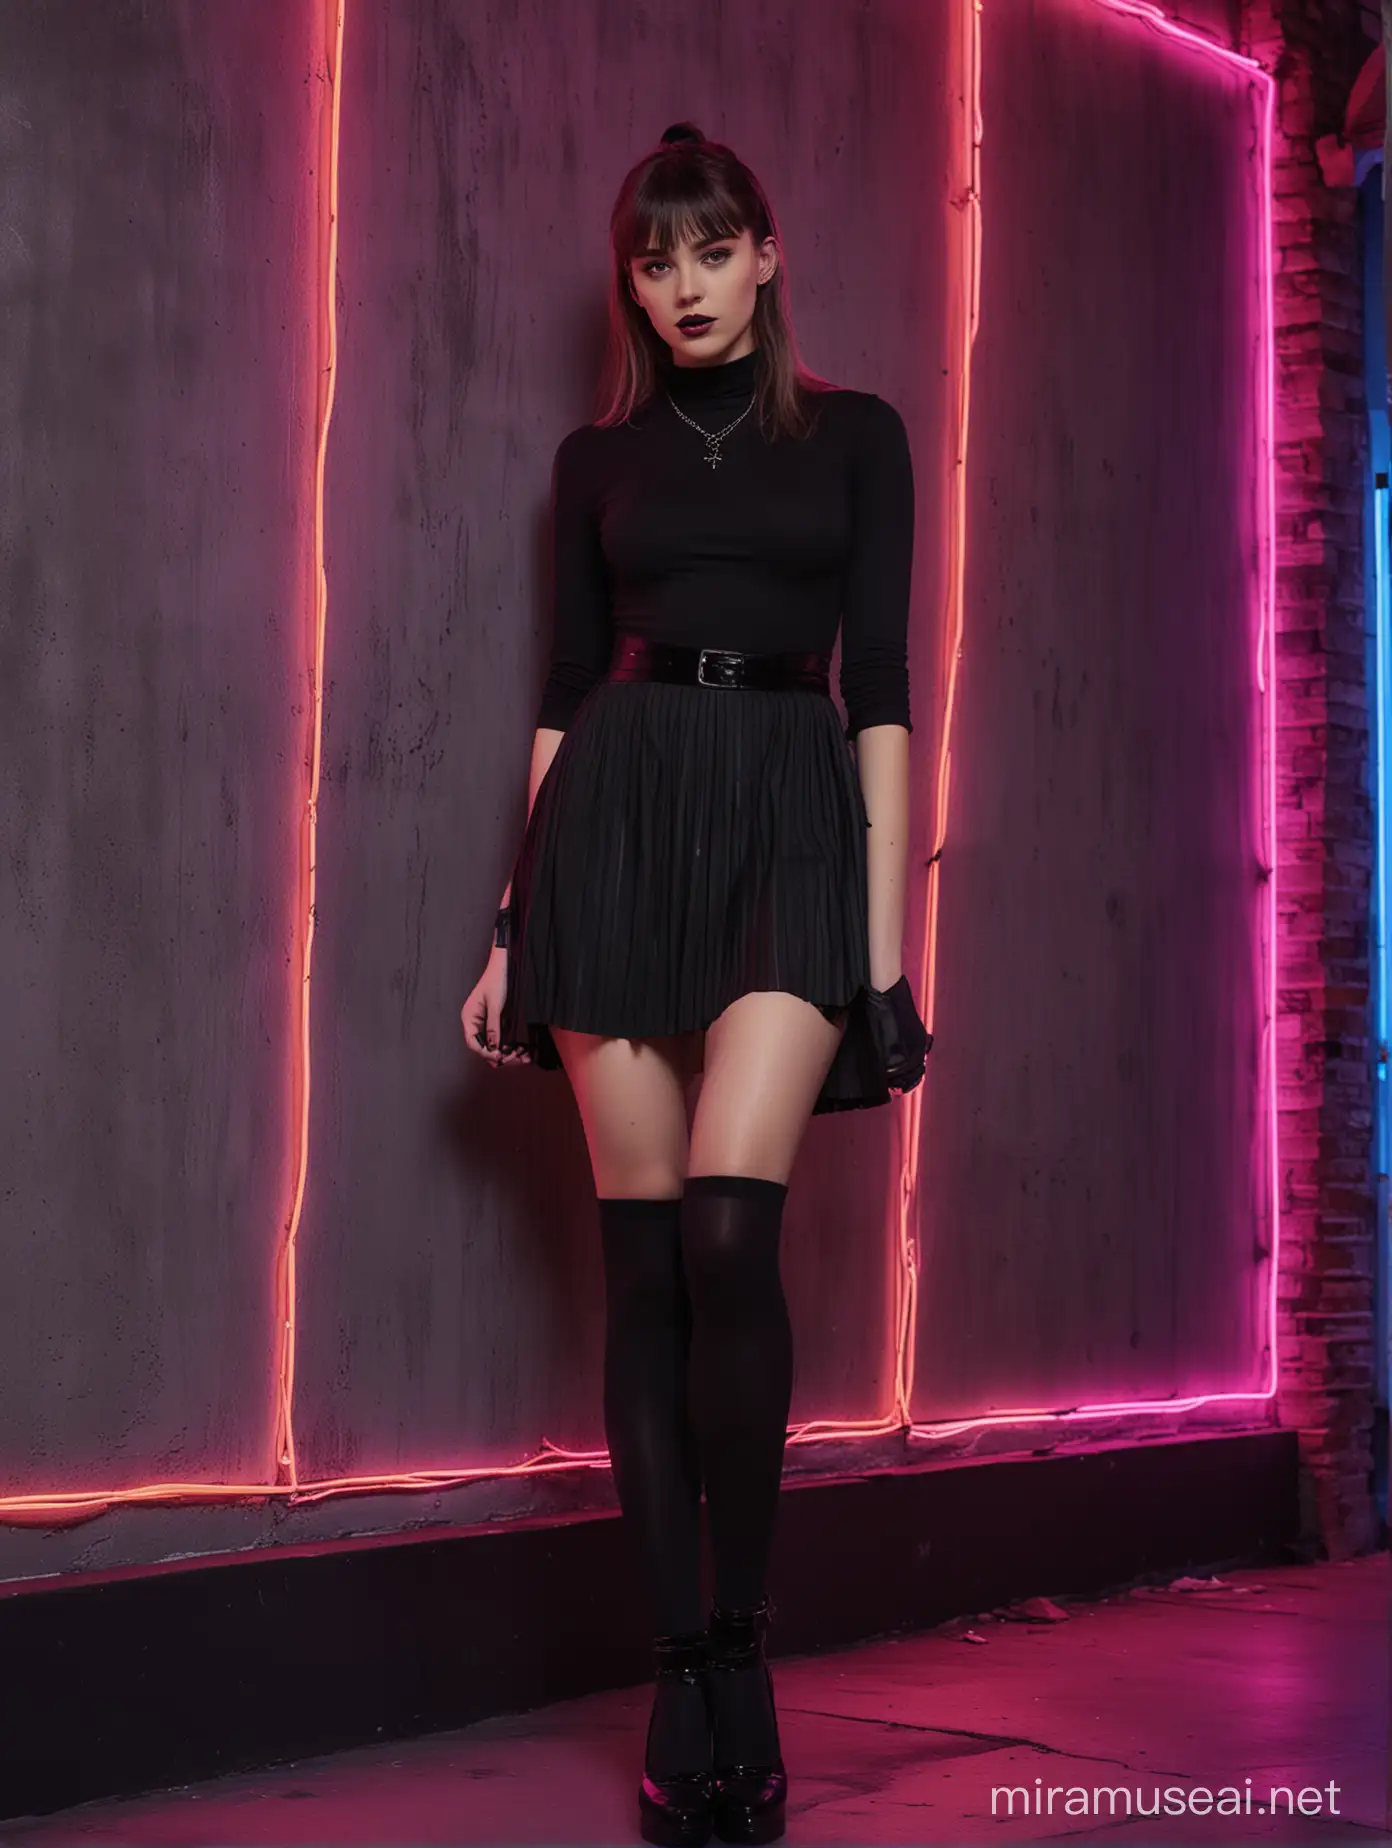 Against a backdrop of neon lights, a girl leans against a wall, her black knee-high stockings adding a touch of darkness to the colorful scene. Her dress is a mix of vintage and modern, with a black choker and knee-high socks completing the look.